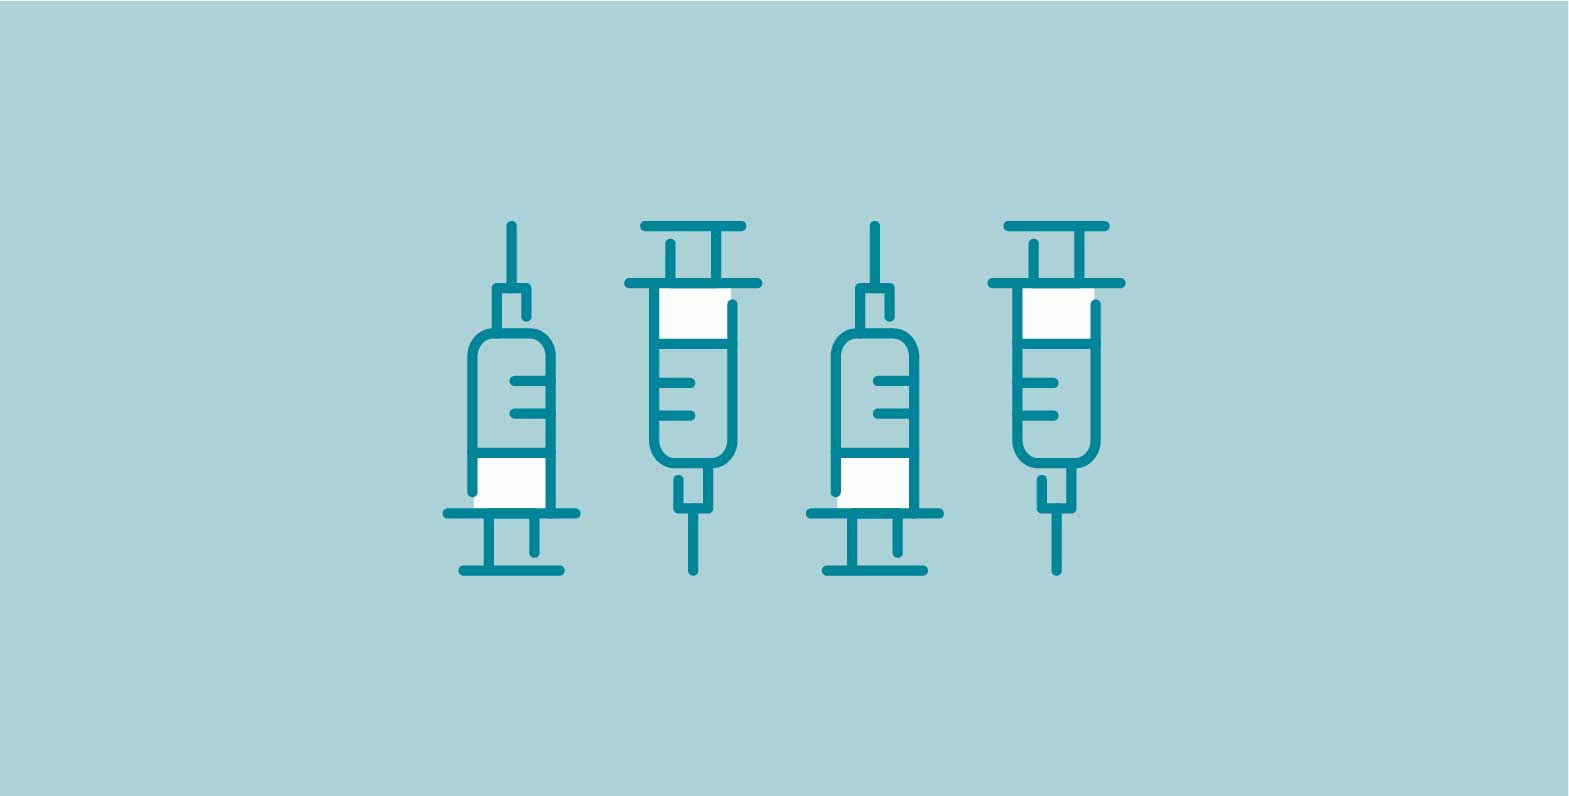 Vaccine Anxiety Post Image - Illustration of stylized syringes